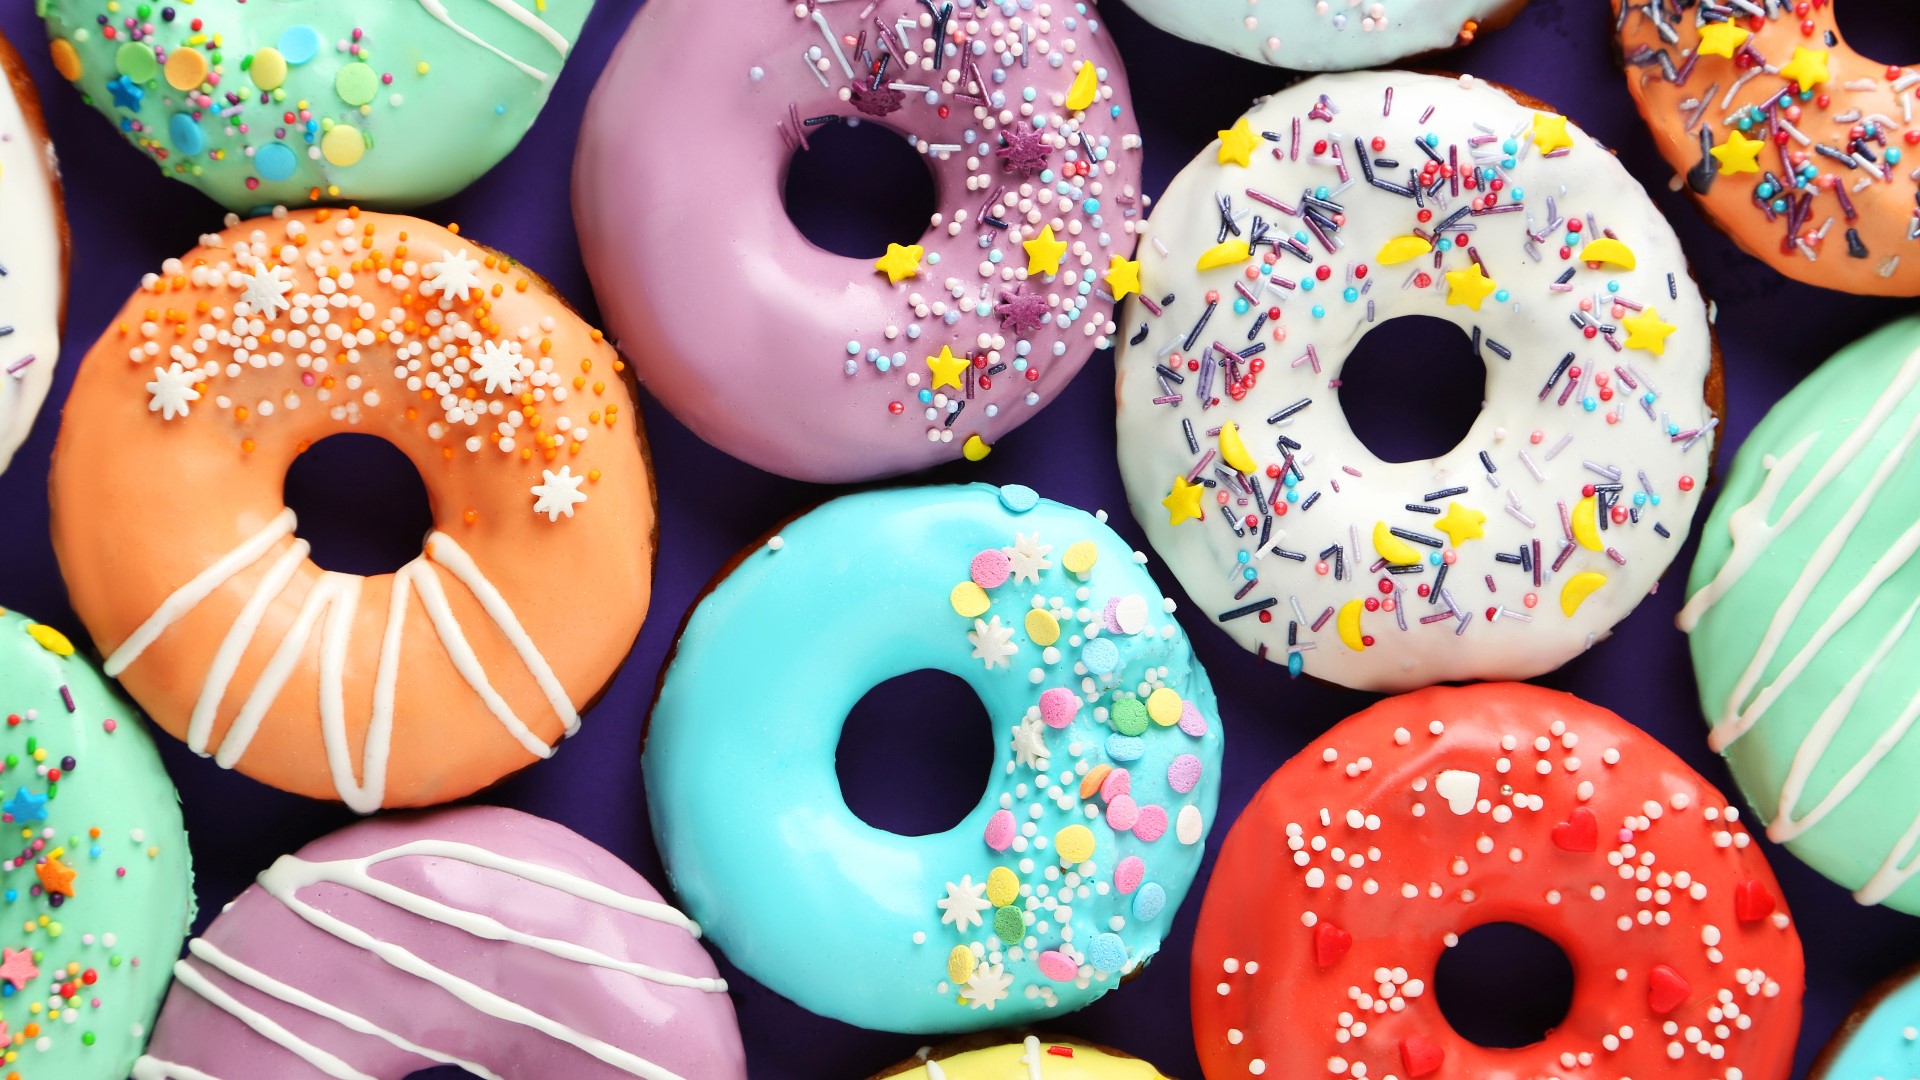 Friday is National Doughnut Day! 5 On Your Side viewers shared their favorite doughnut shops to visit on Doughnut Day.